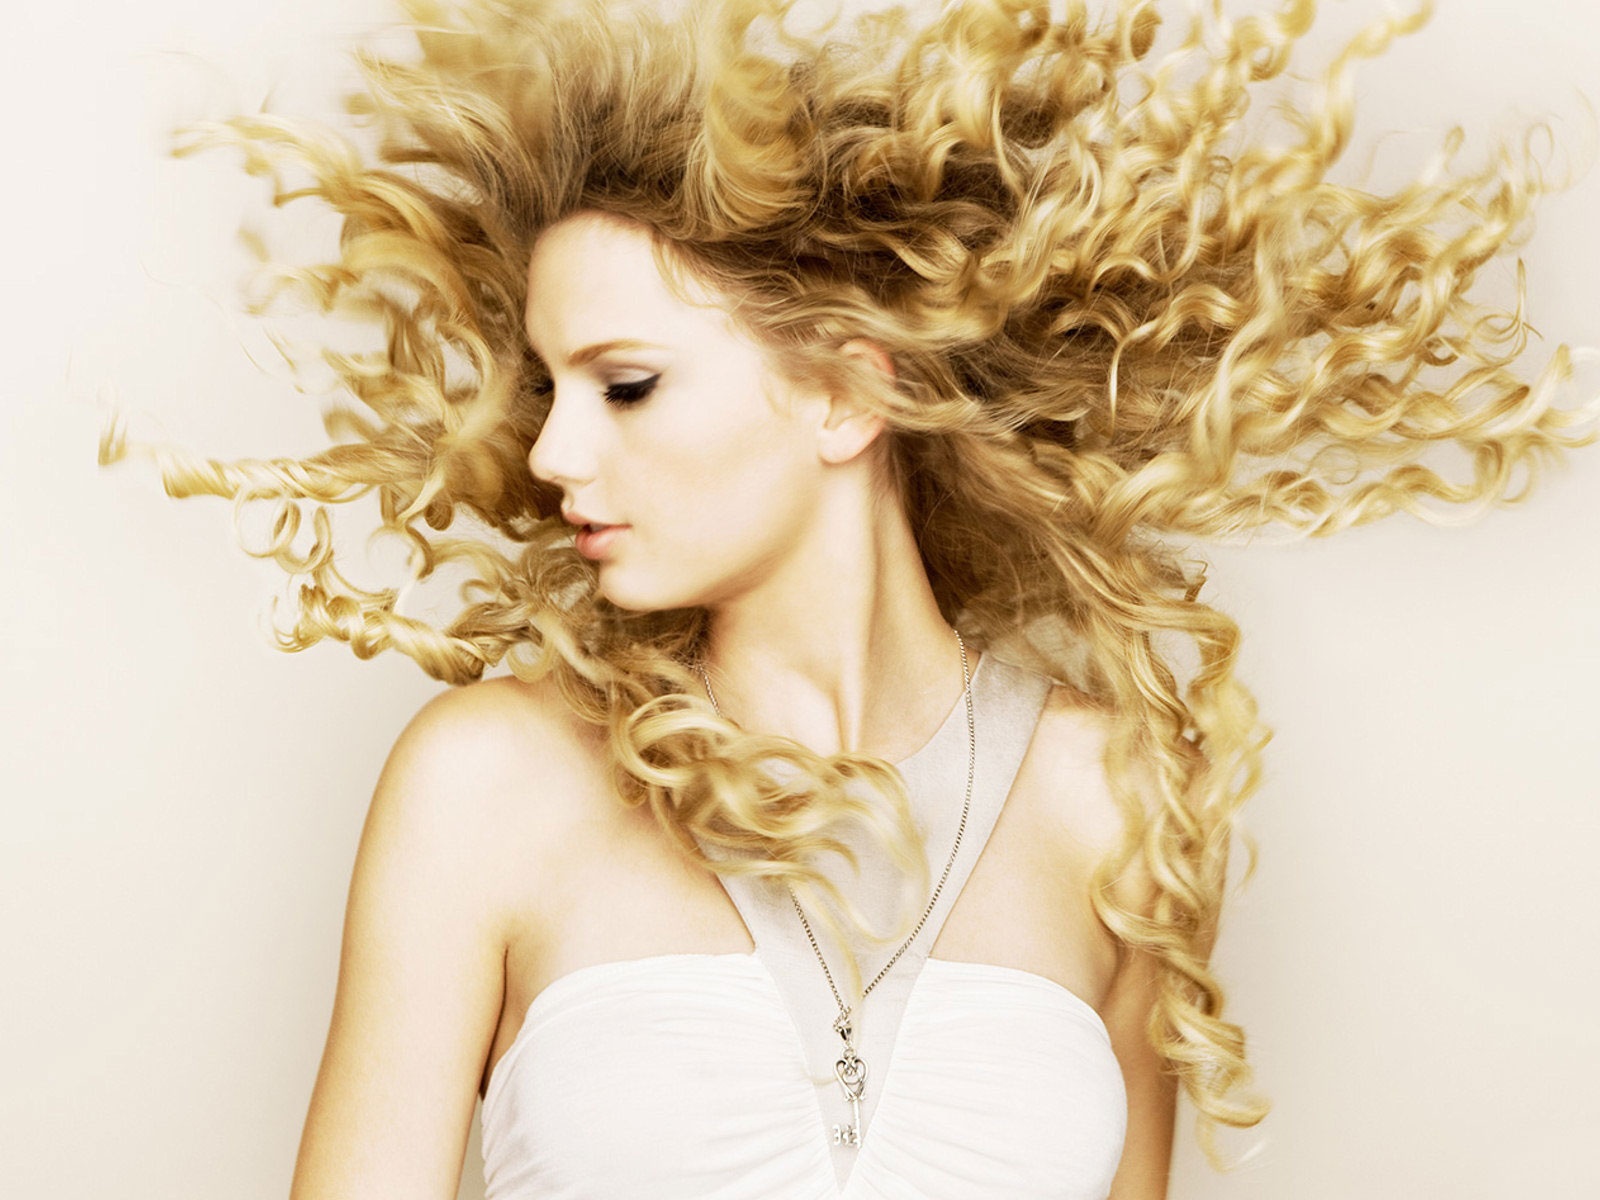 taylor swift wallpapers hd A8